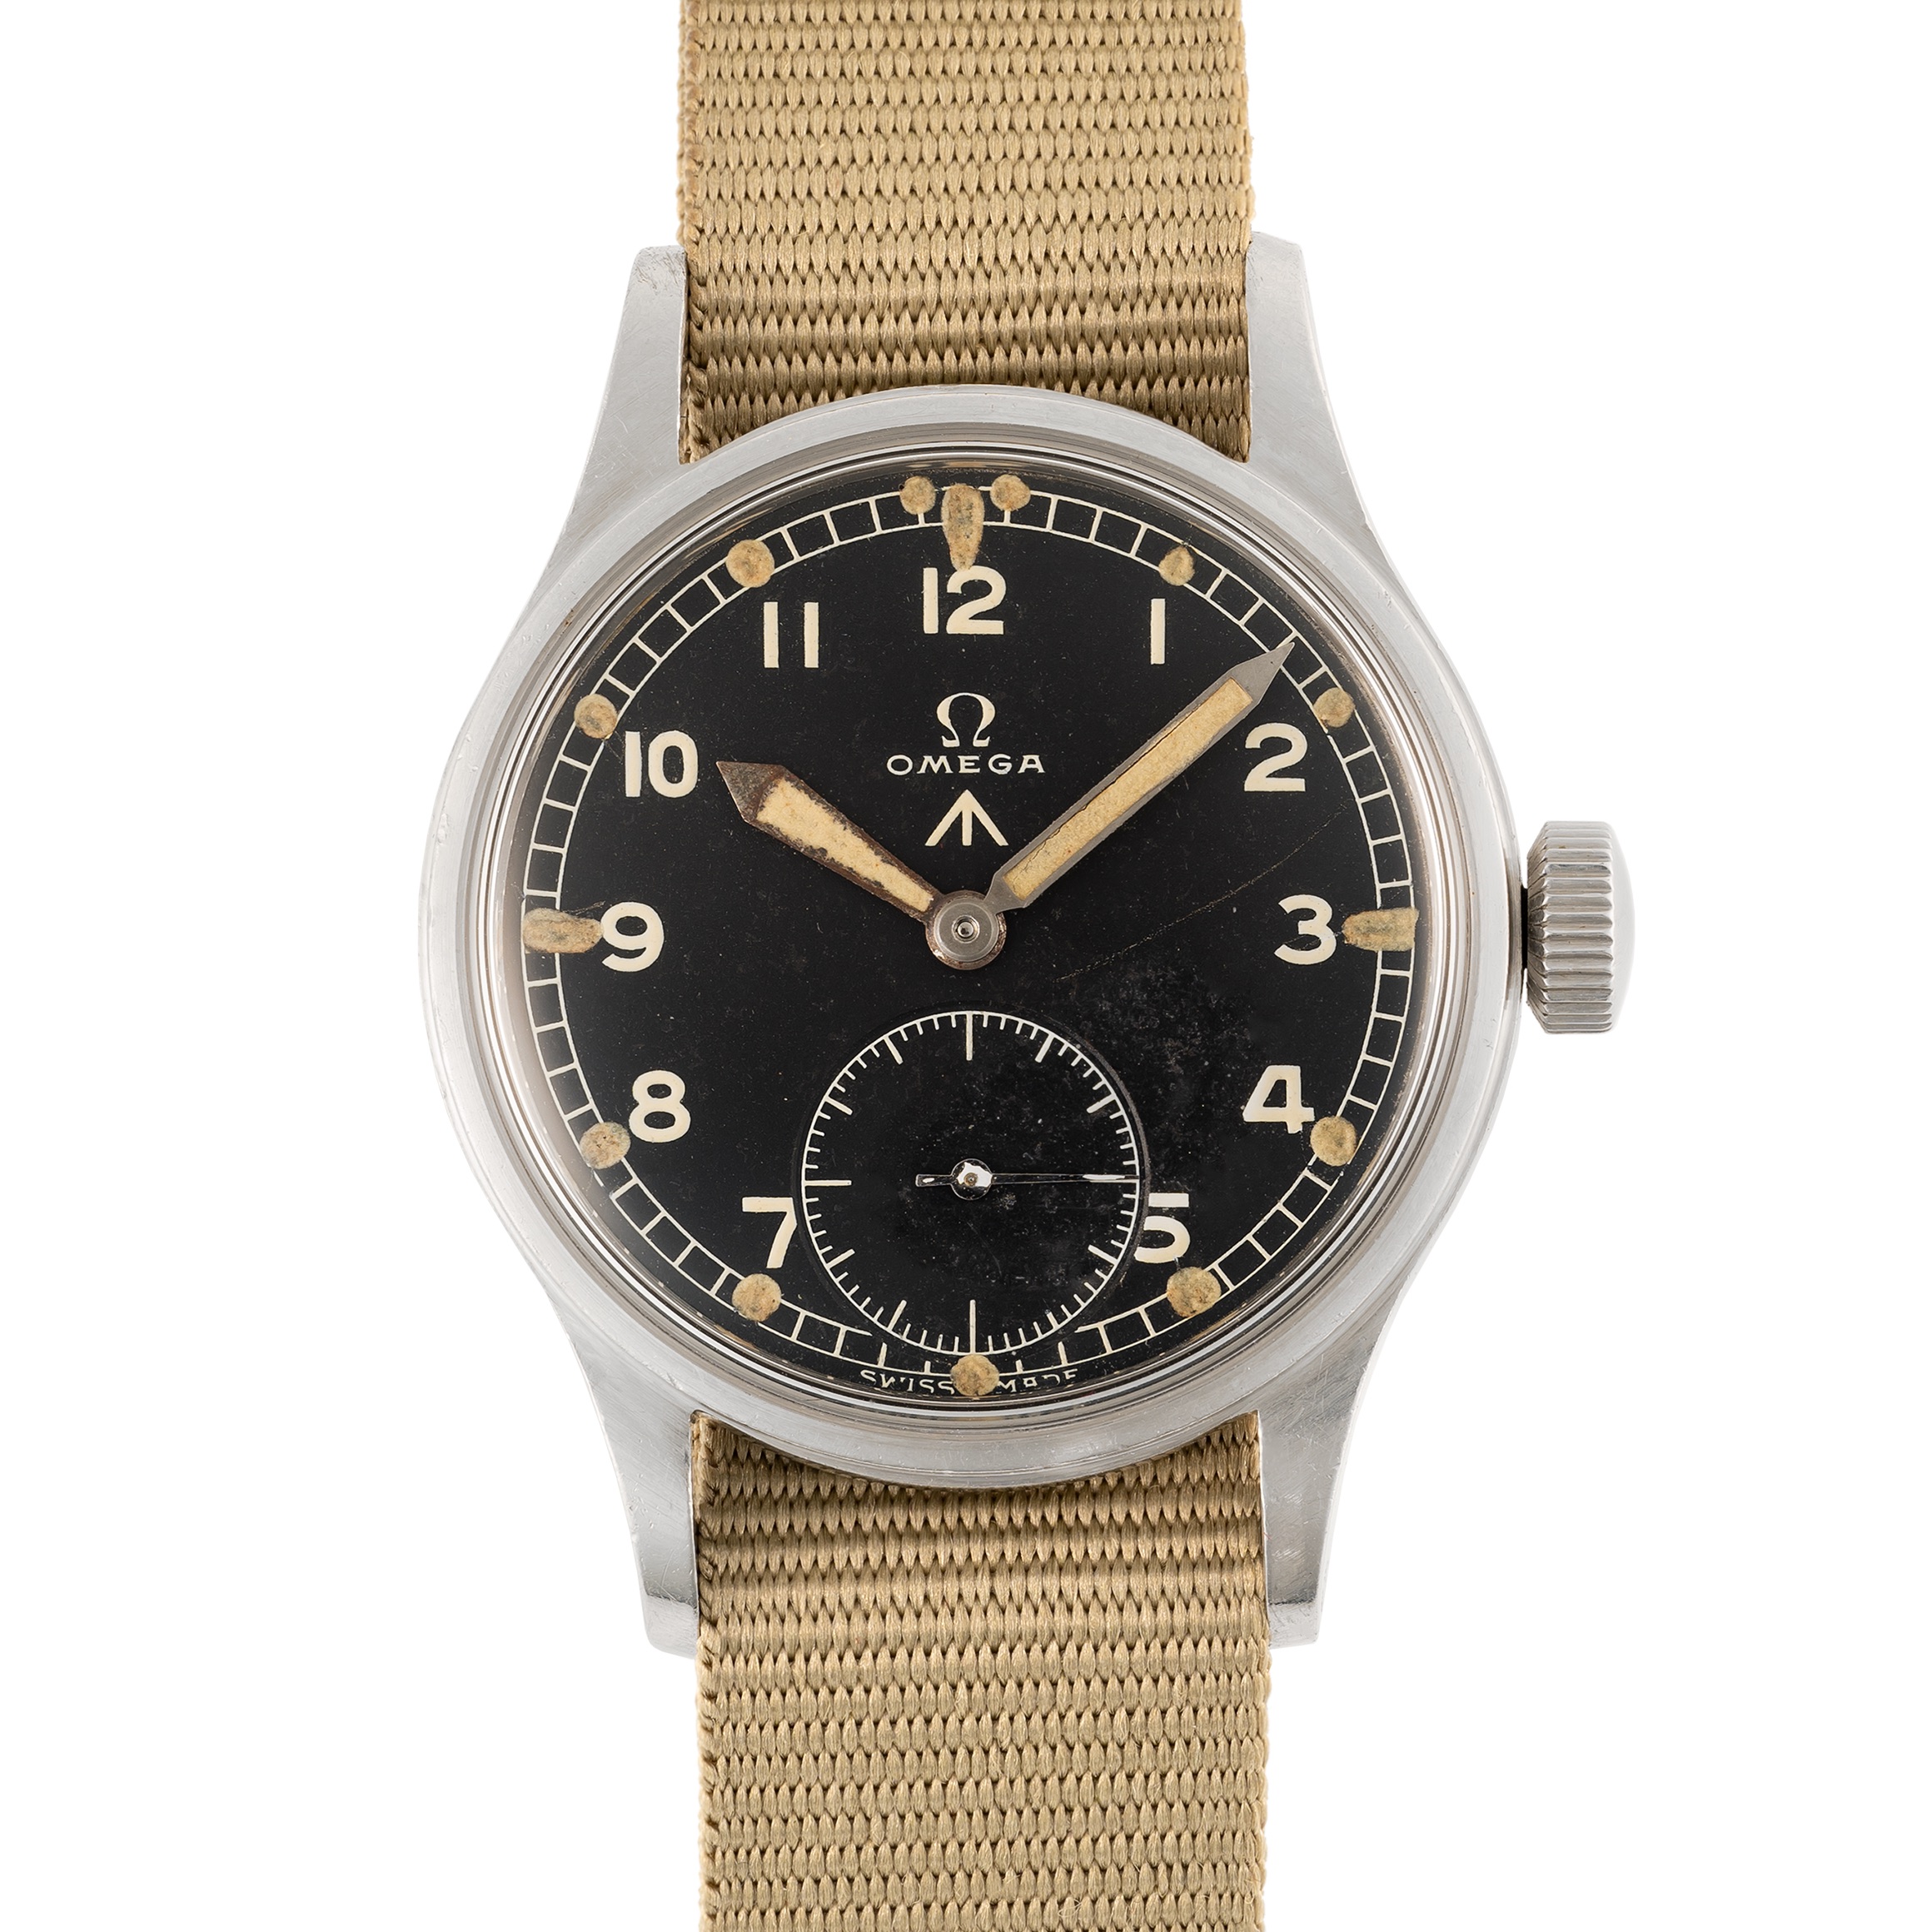 A GENTLEMAN'S STAINLESS STEEL BRITISH MILITARY OMEGA W.W.W. WRIST WATCH CIRCA 1945, PART OF THE "